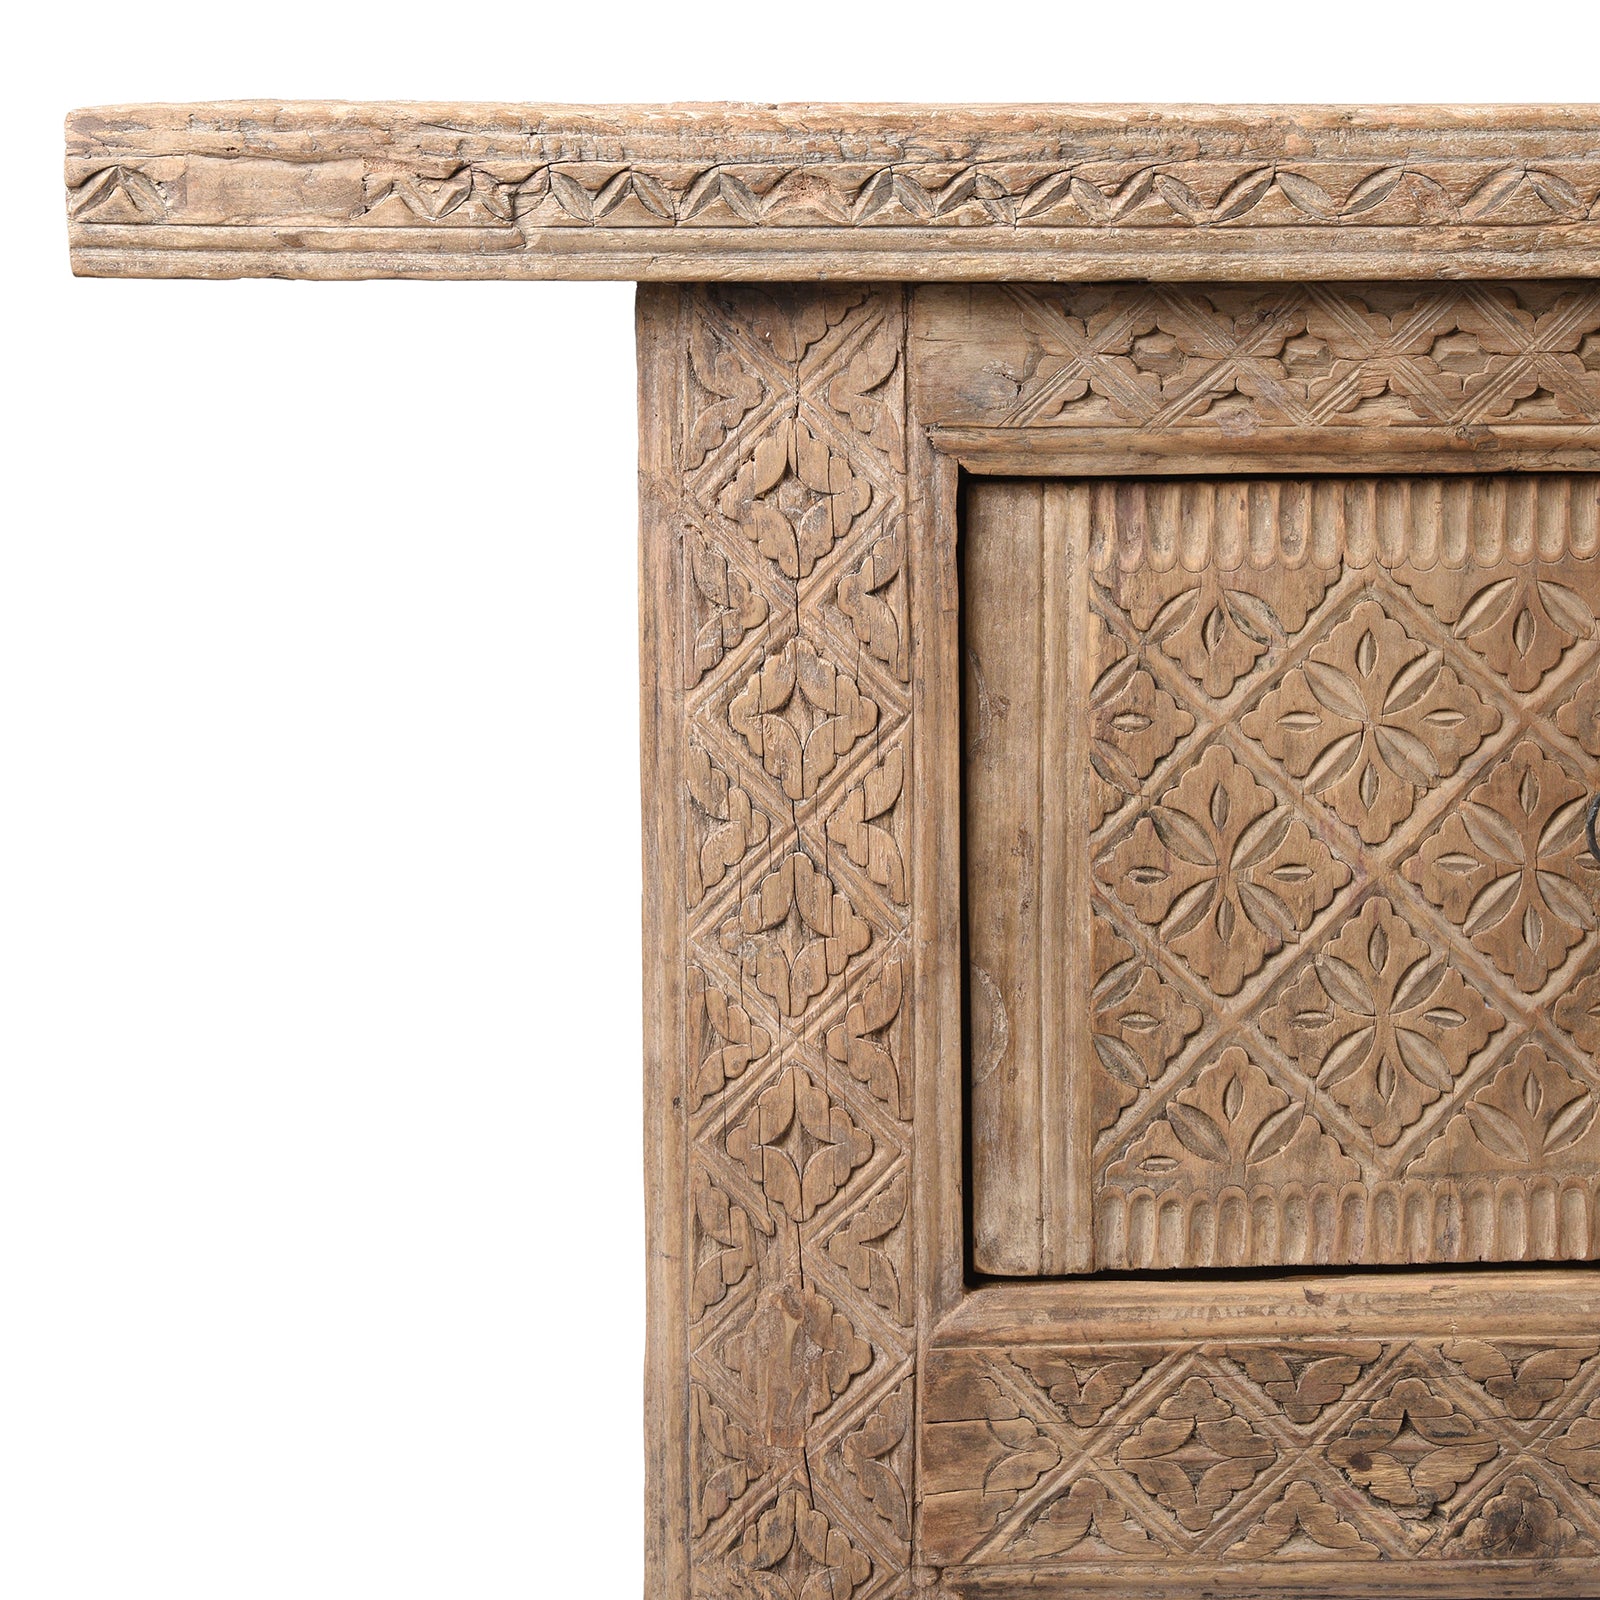 Antique Carved Low Sideboard From Xinjiang | Indigo Antiques